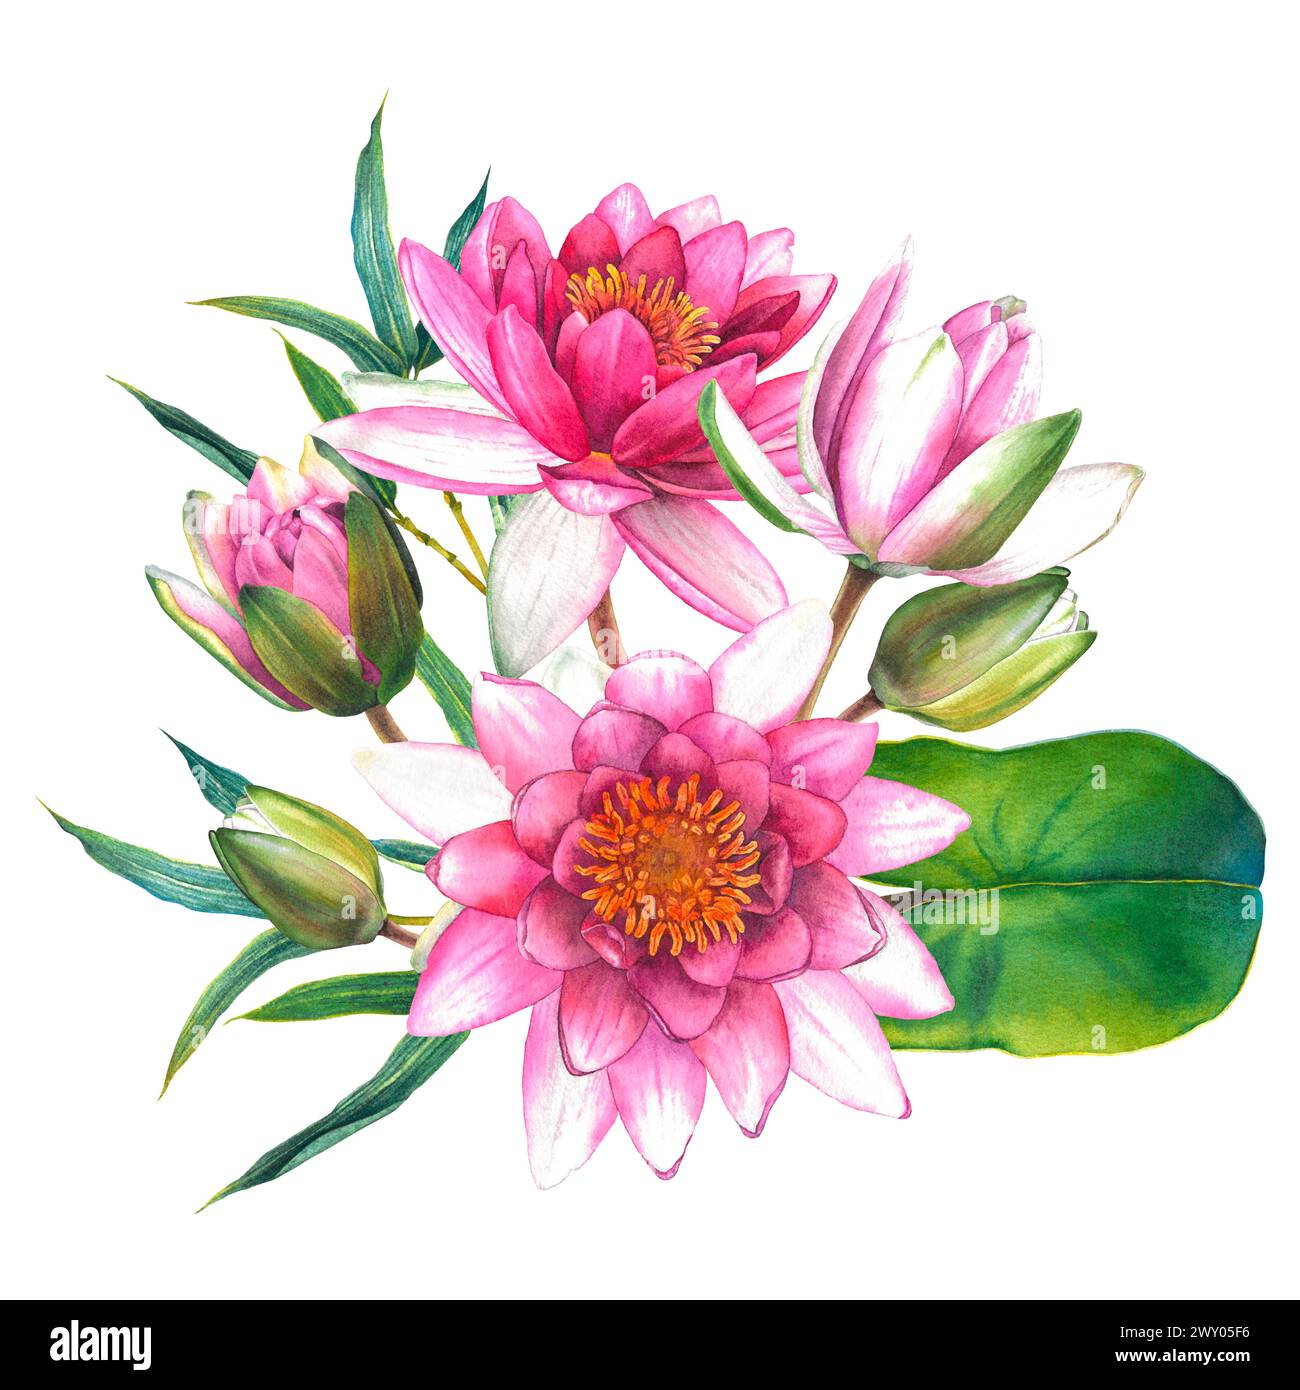 Watercolor flowers painting, floral bouquet illustration with pink water lilies, buds, green leaves and bamboo twigs isolated on background. Stock Photo